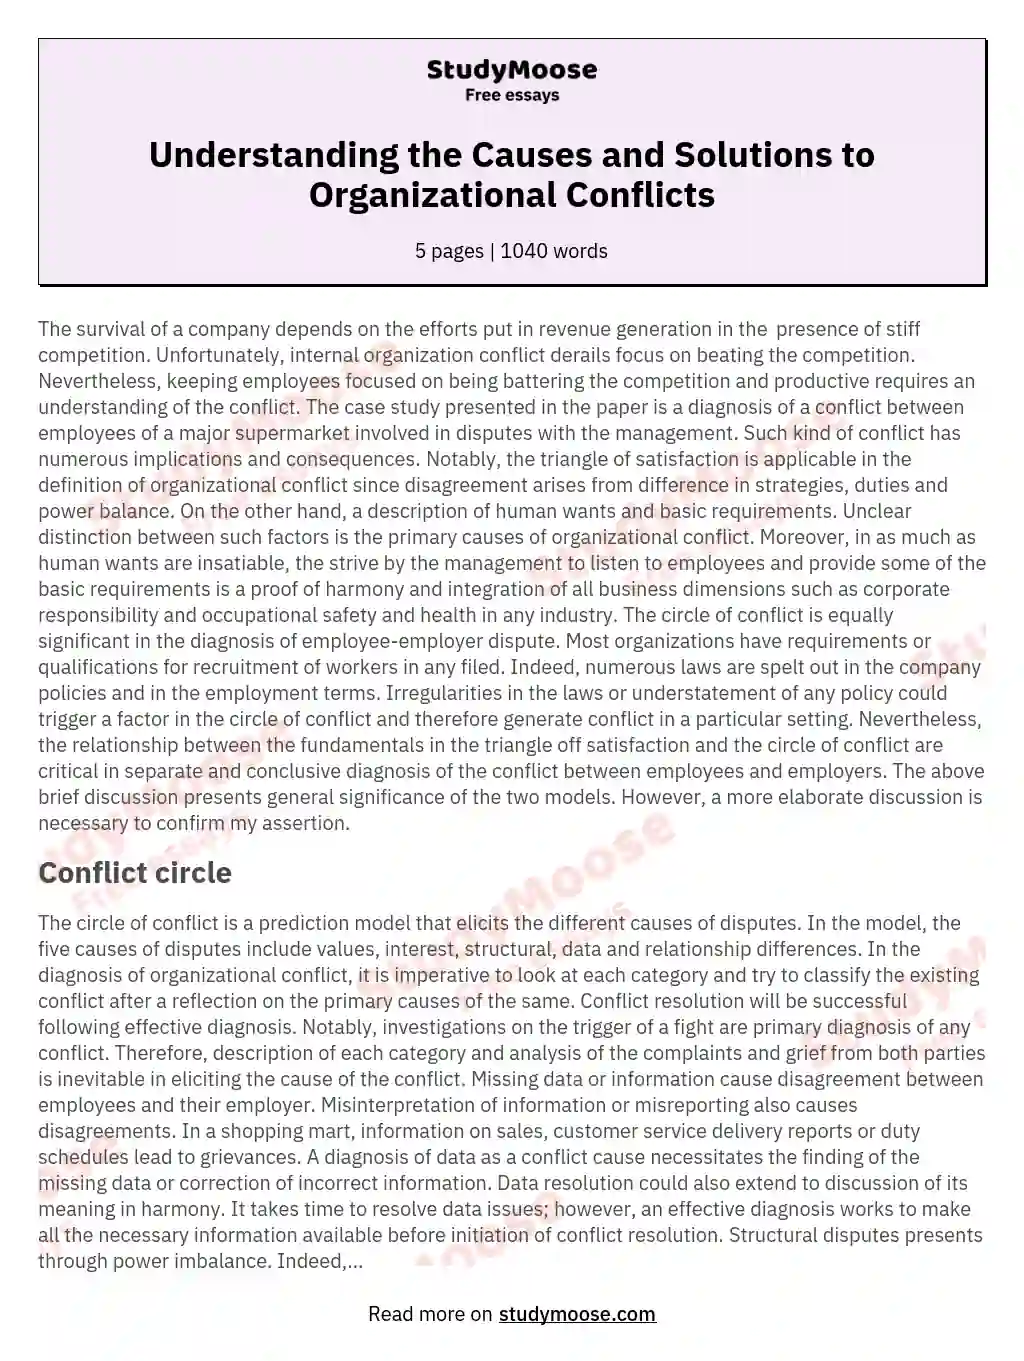 Understanding the Causes and Solutions to Organizational Conflicts essay